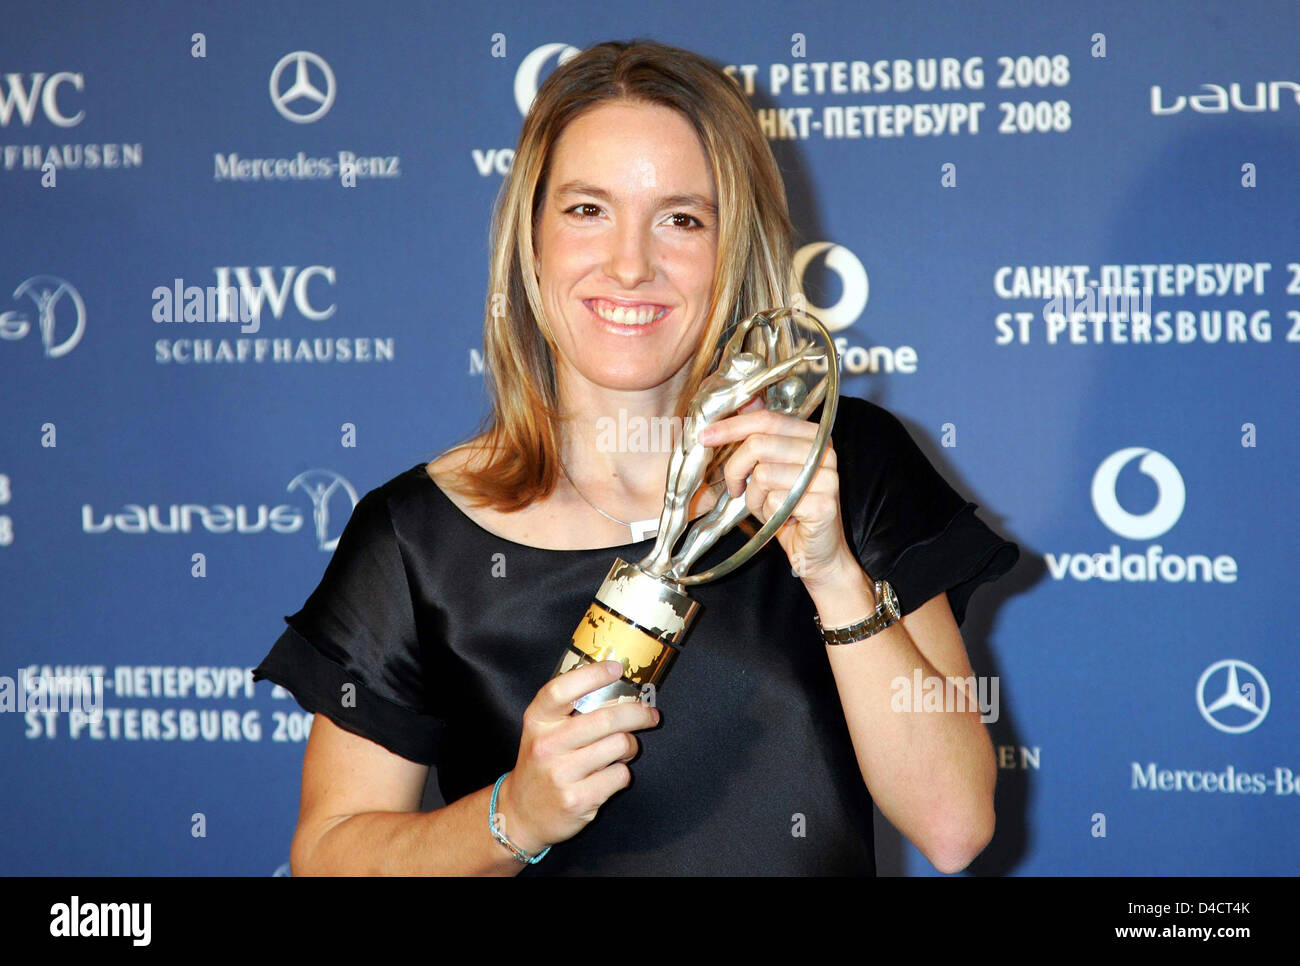 Belgian tennis professional Justine Henin poses with her 'Laureus World Sportswoman of the Year' -award at the 'Laureus World Sports Awards' in Saint Petersburg, Russian Federation, 17 February 2008. Outstanding athletes, who had been selected by a jury comprised of former top athletes, were awarded the Laureus Sports Award on 18 February. Photo: GERO BRELOER Stock Photo